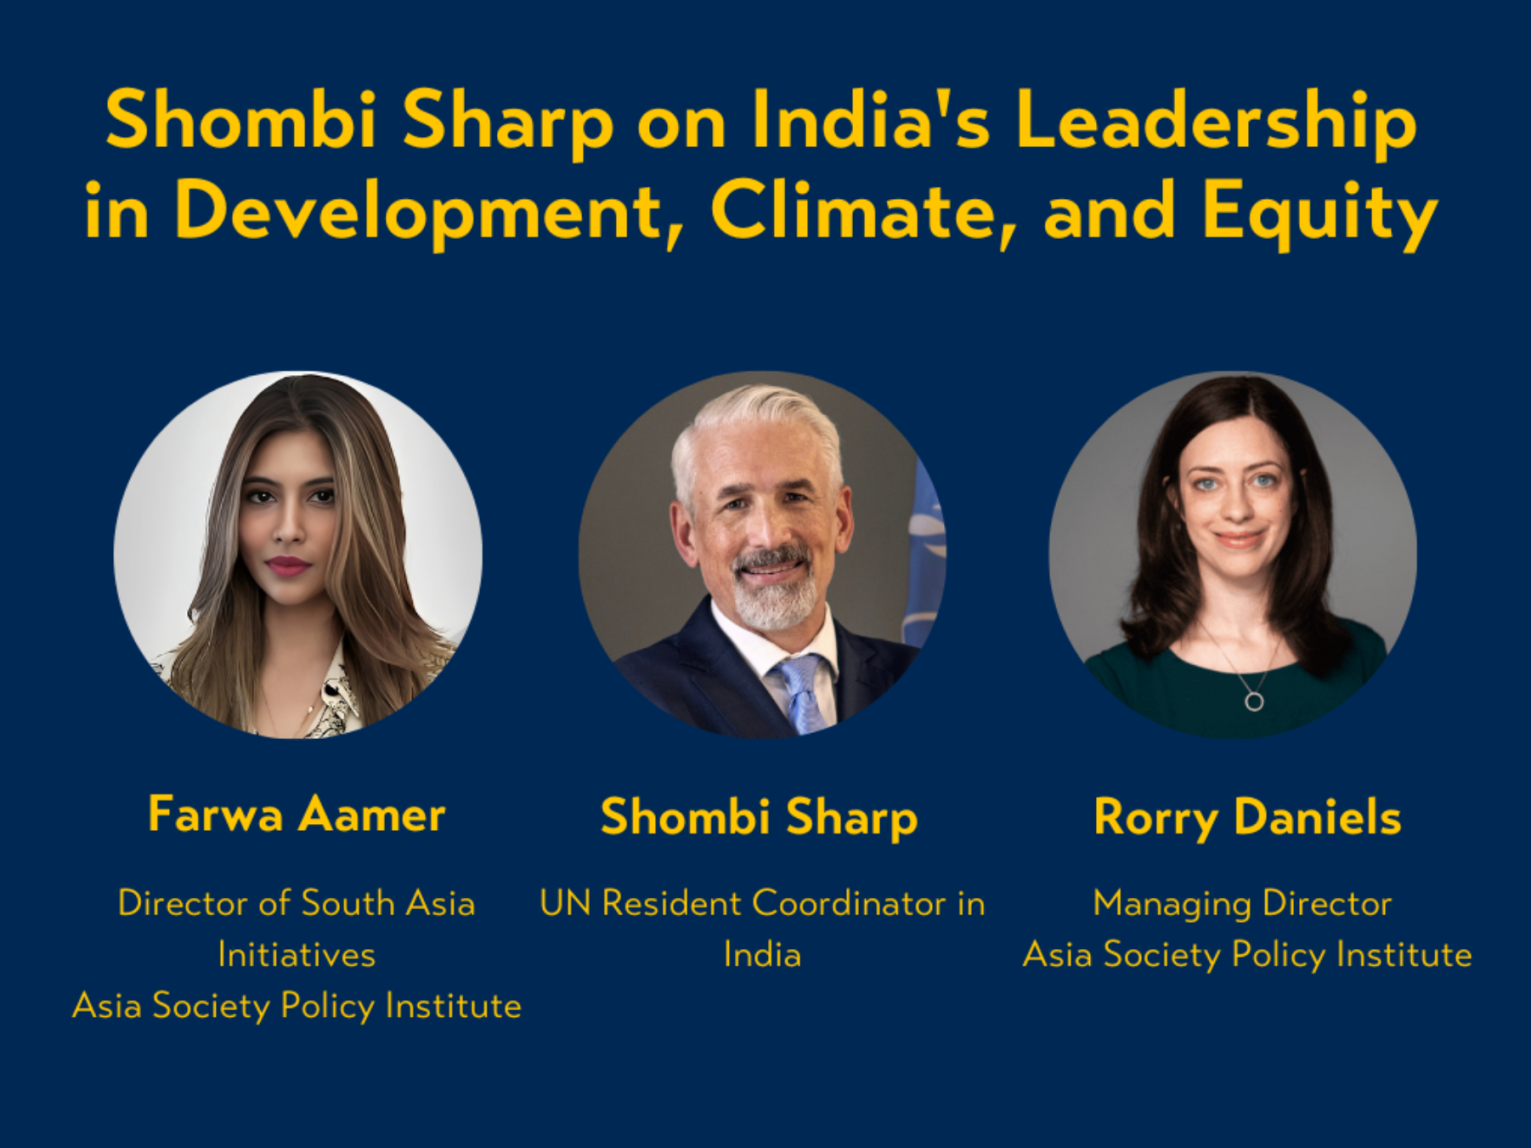  Shombi Sharp on India's Leadership in Development, Climate, and Equity 